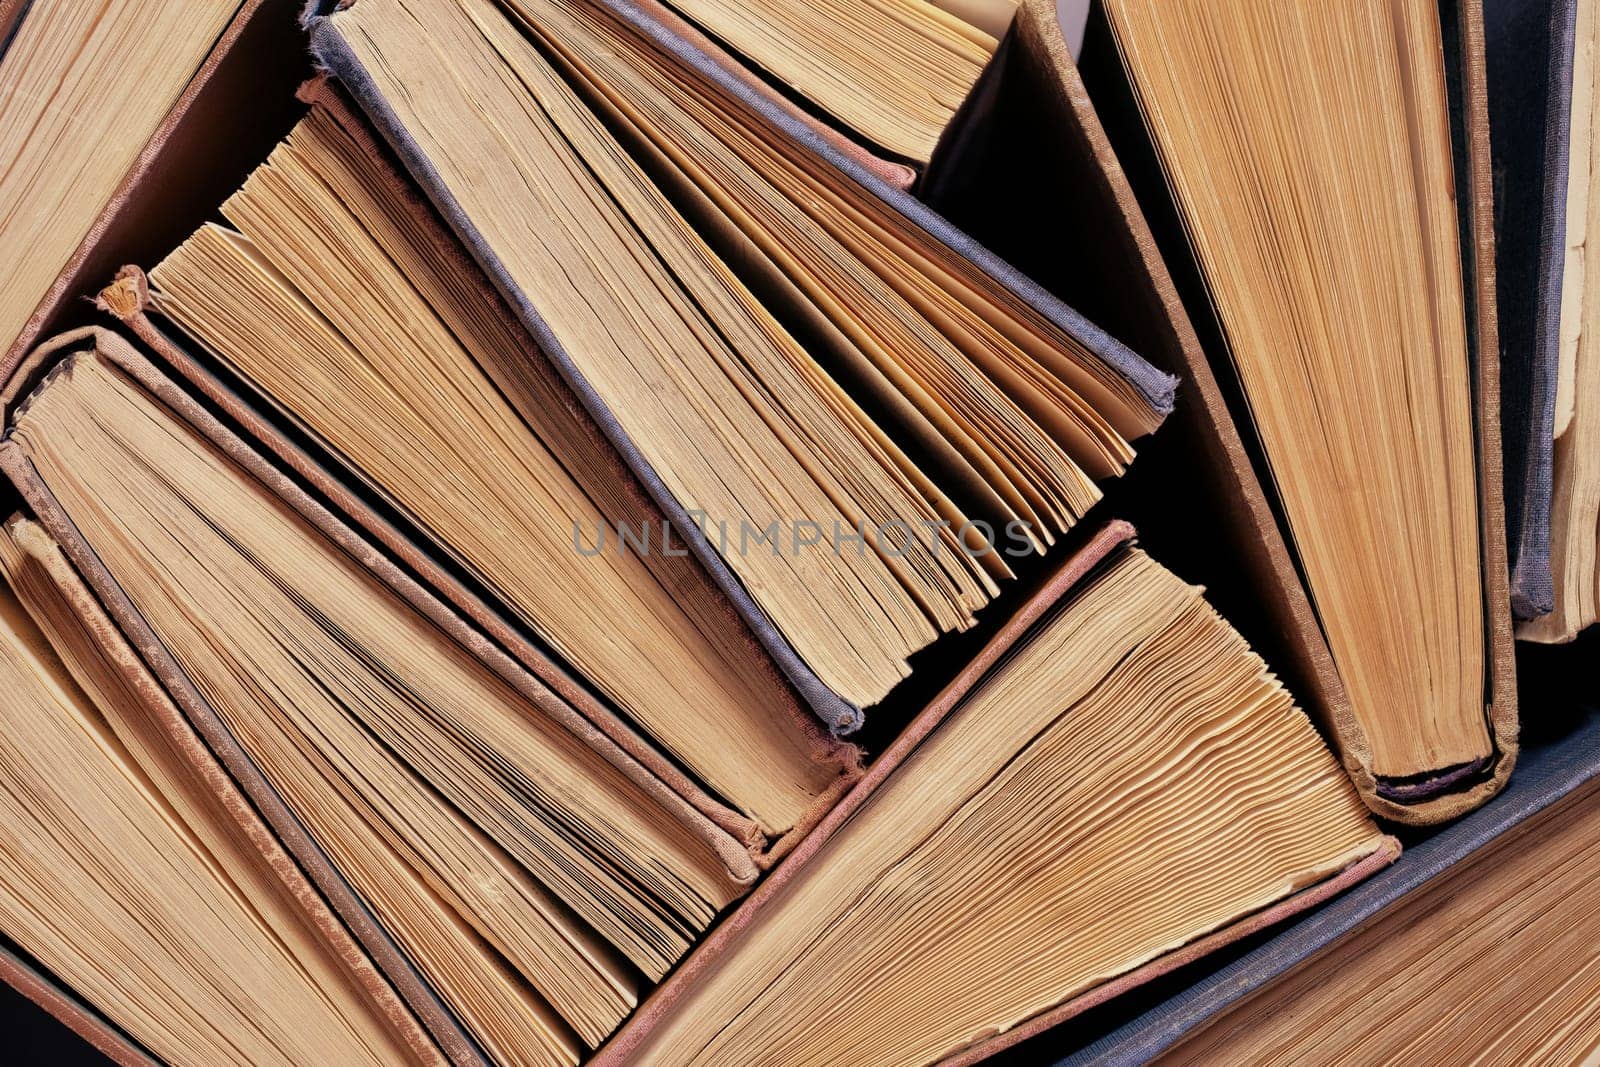 Old and used books, literature or textbooks. Top view. Education concept.